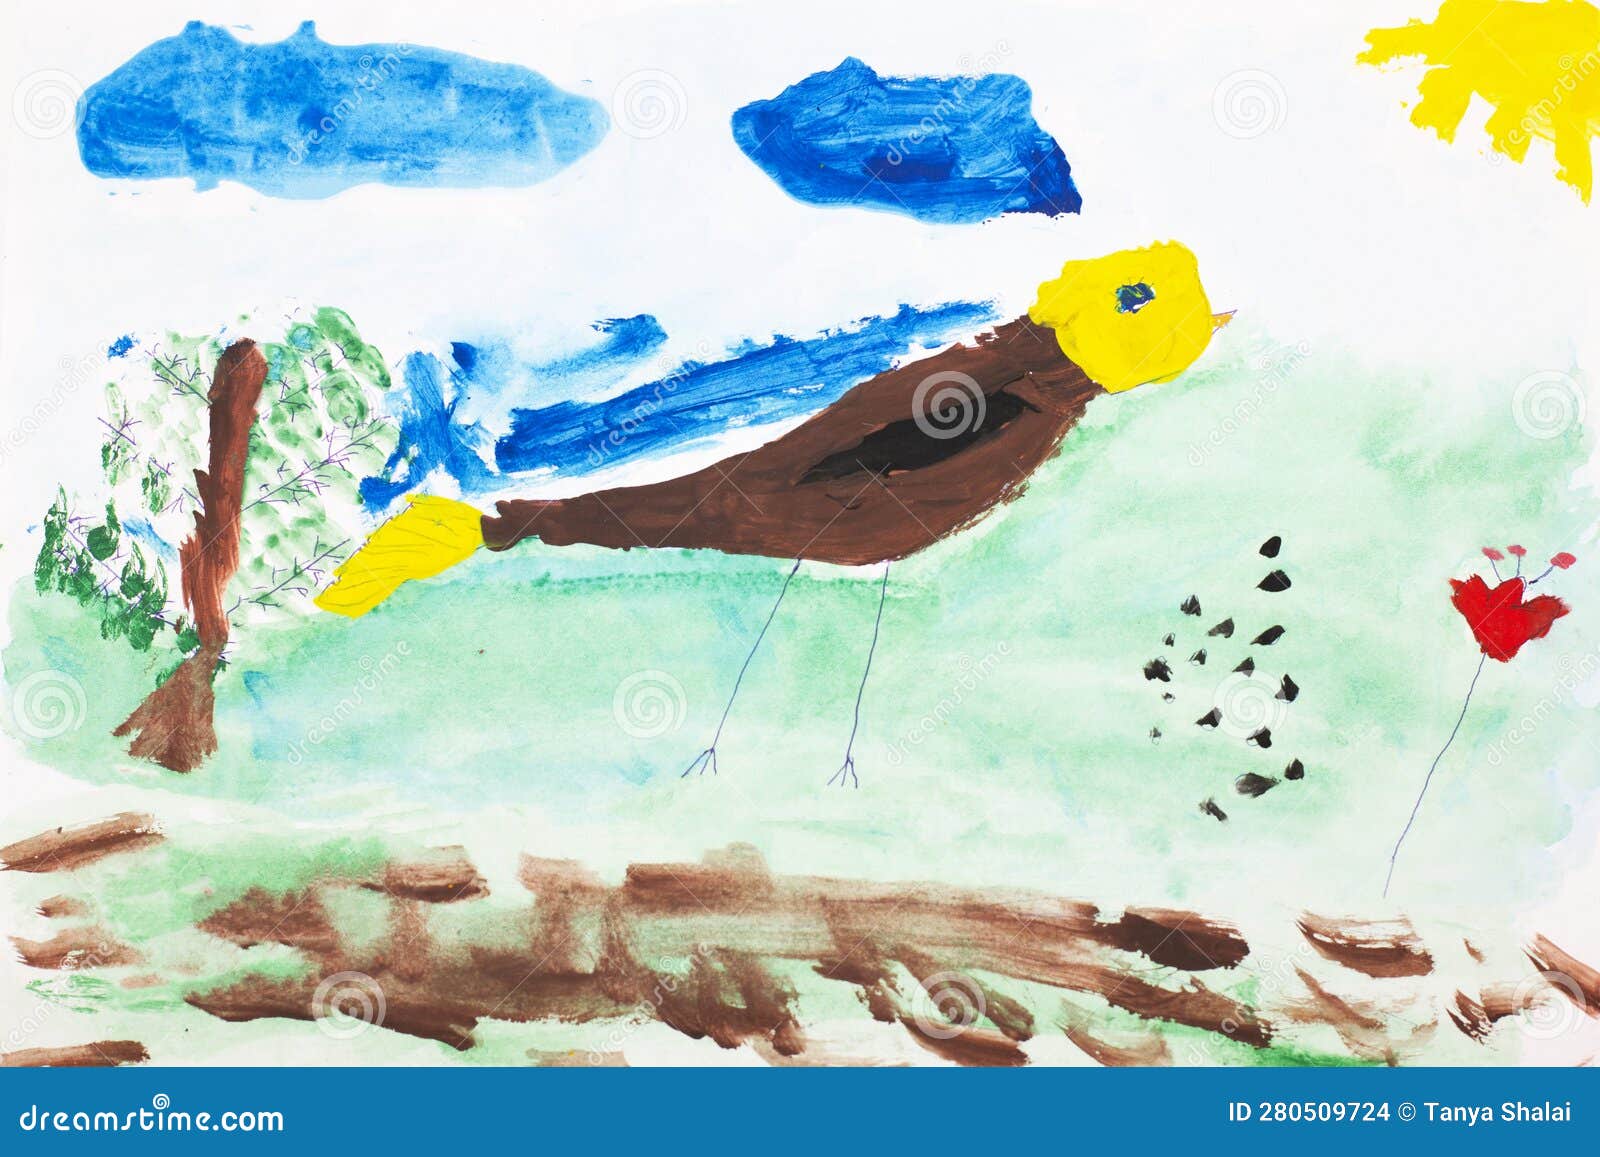 bird in the meadow. real drawing of a small child. drawing by watercolor.